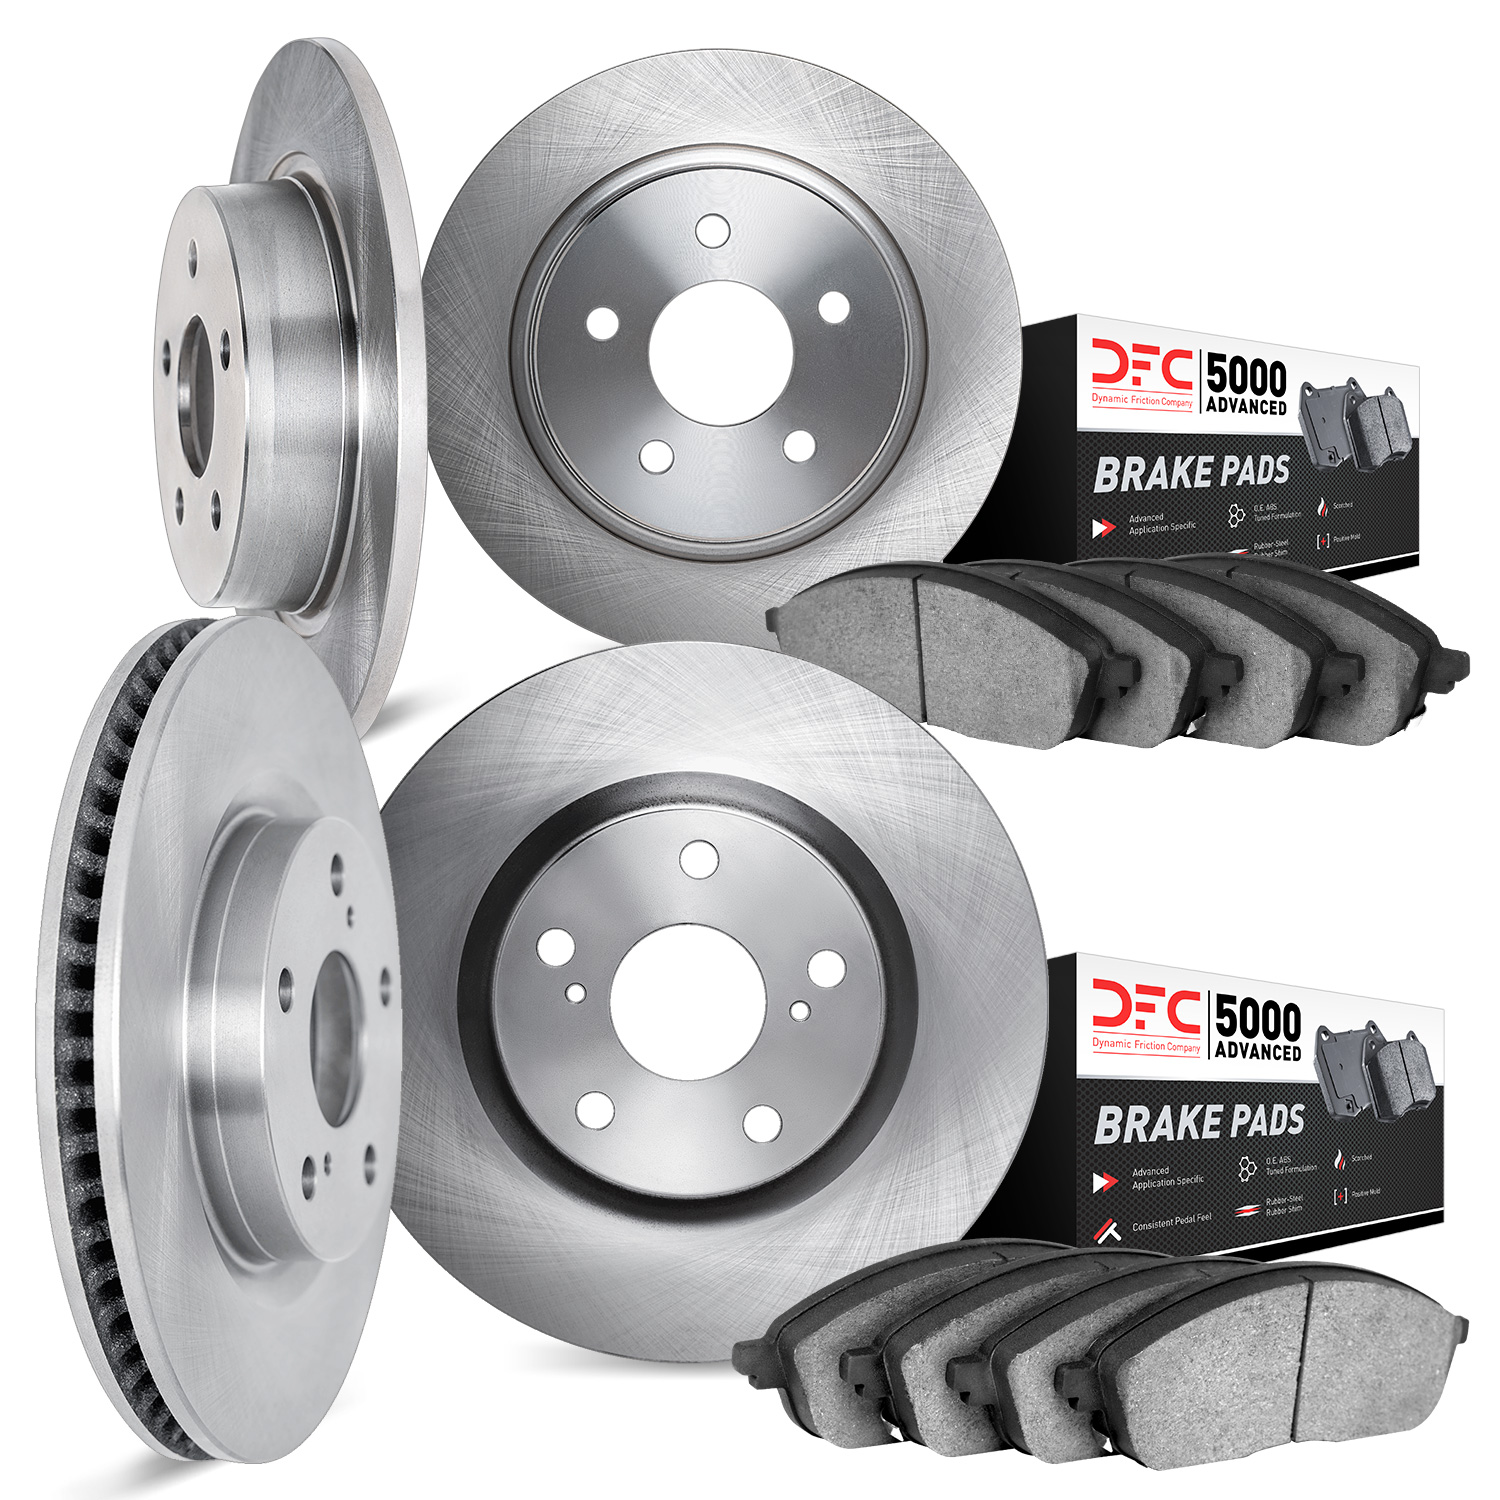 6504-92036 Brake Rotors w/5000 Advanced Brake Pads Kit, 2010-2014 Renault, Position: Front and Rear